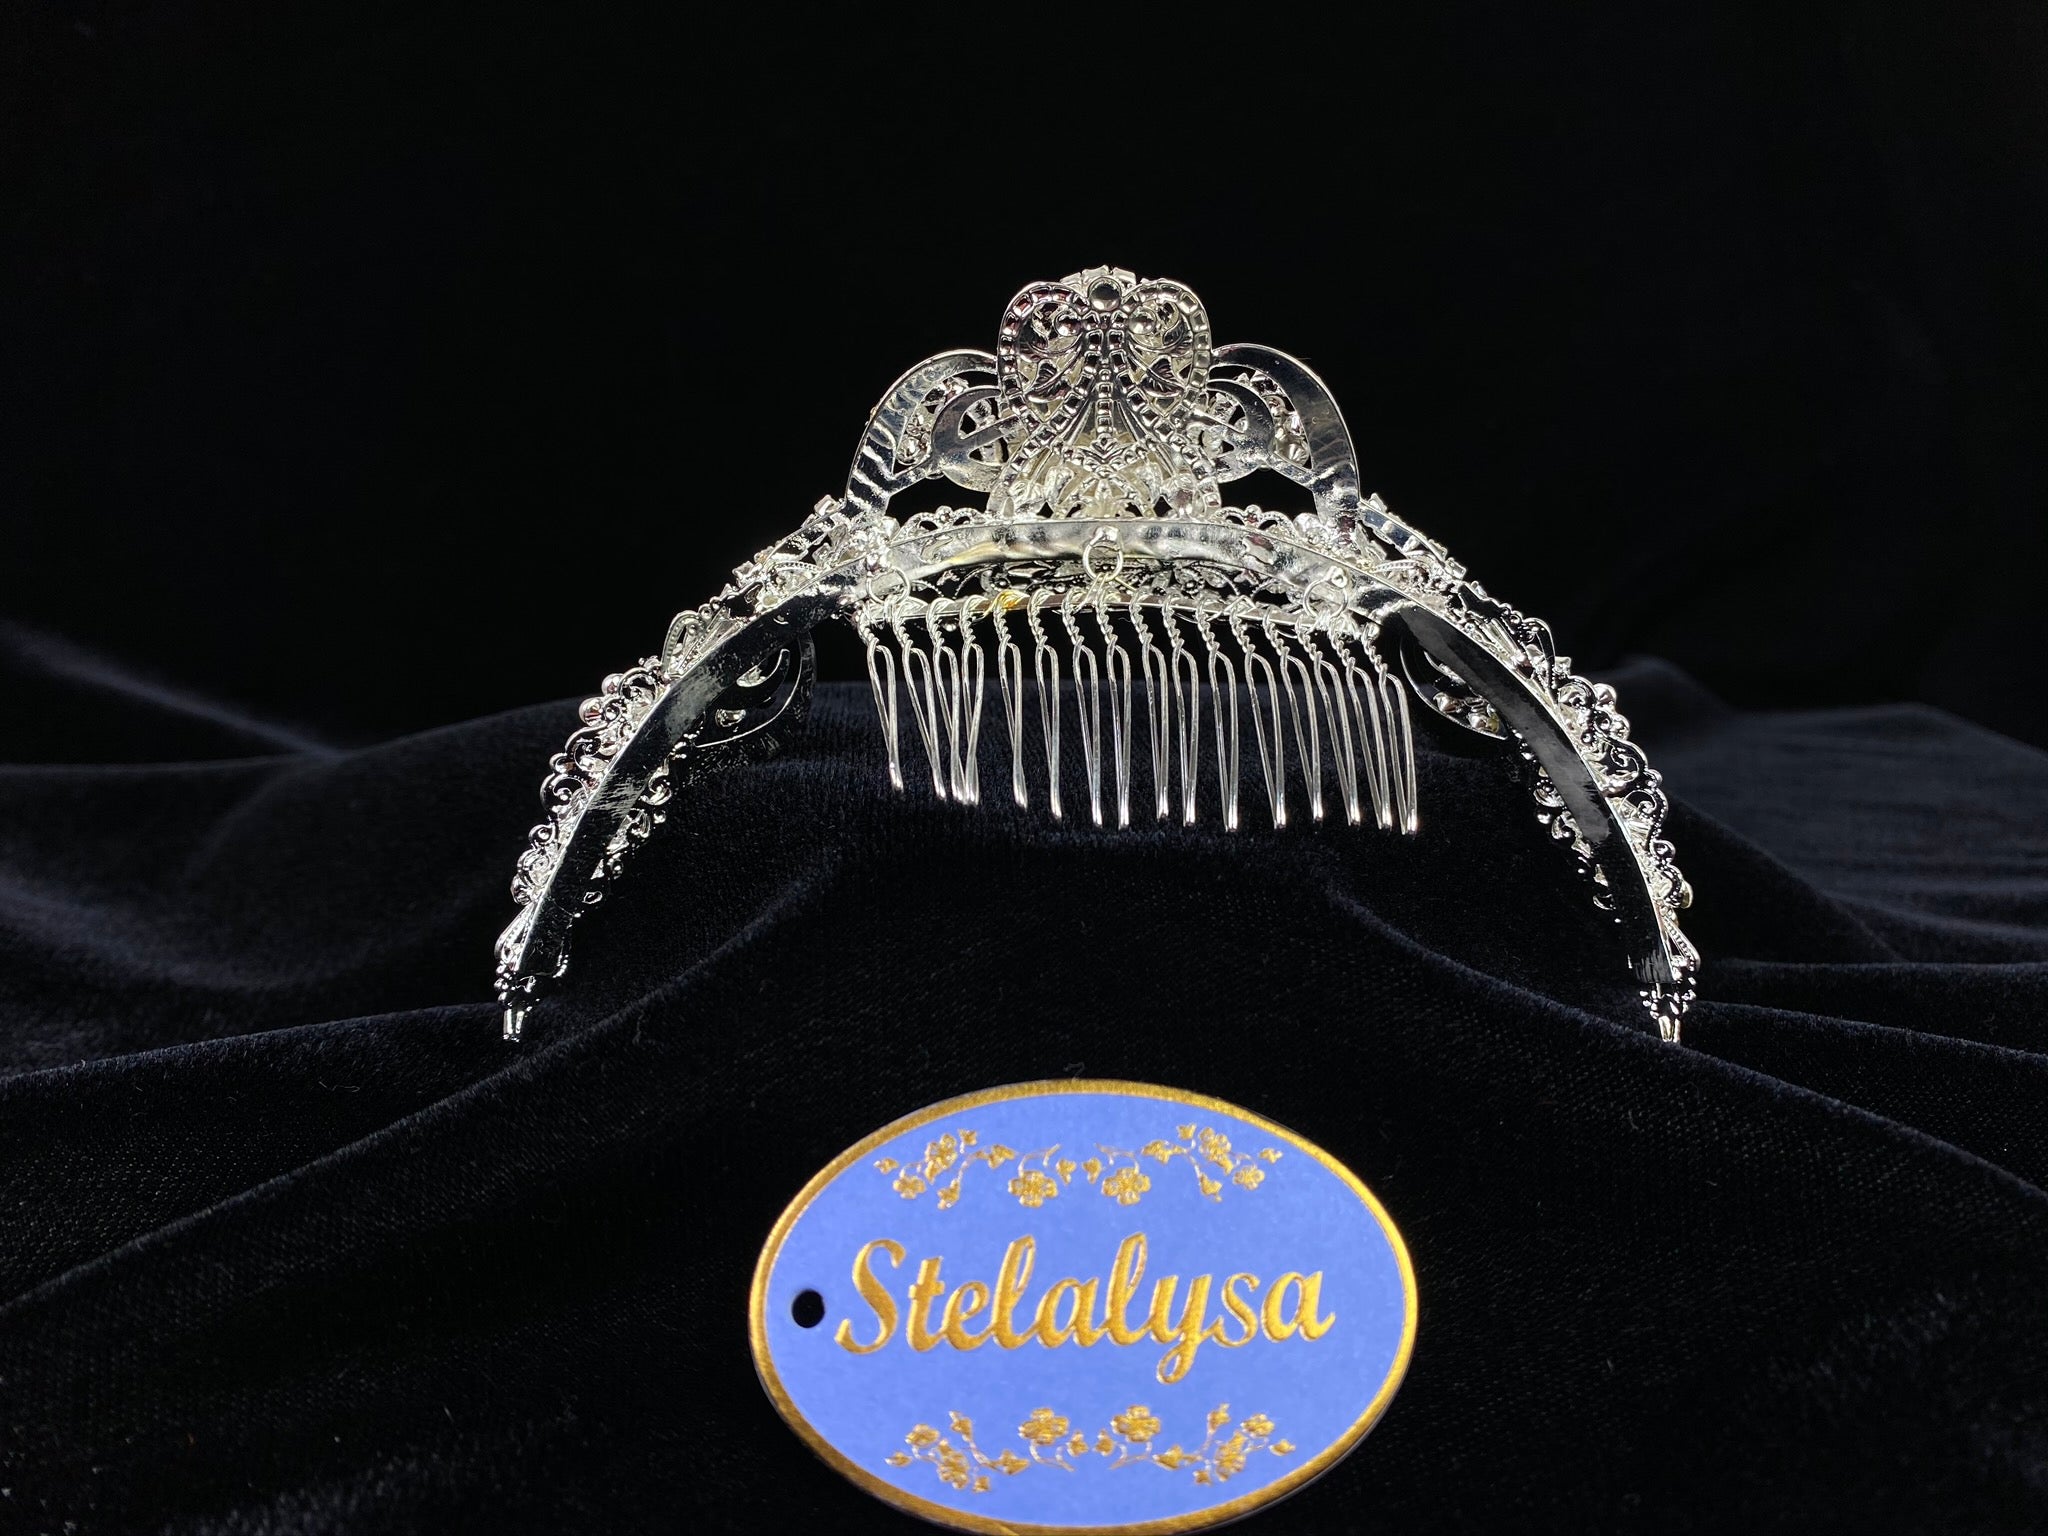 A must have for the First Communion!   Beautiful tiara, covered in gorgeous rhinestones. Pearl clusters create flowers around rhinestones.  Tiara is 5" across.  Wear this tiara with either a white or ivory veil from our Veil Collection to complete the look for the ceremony.